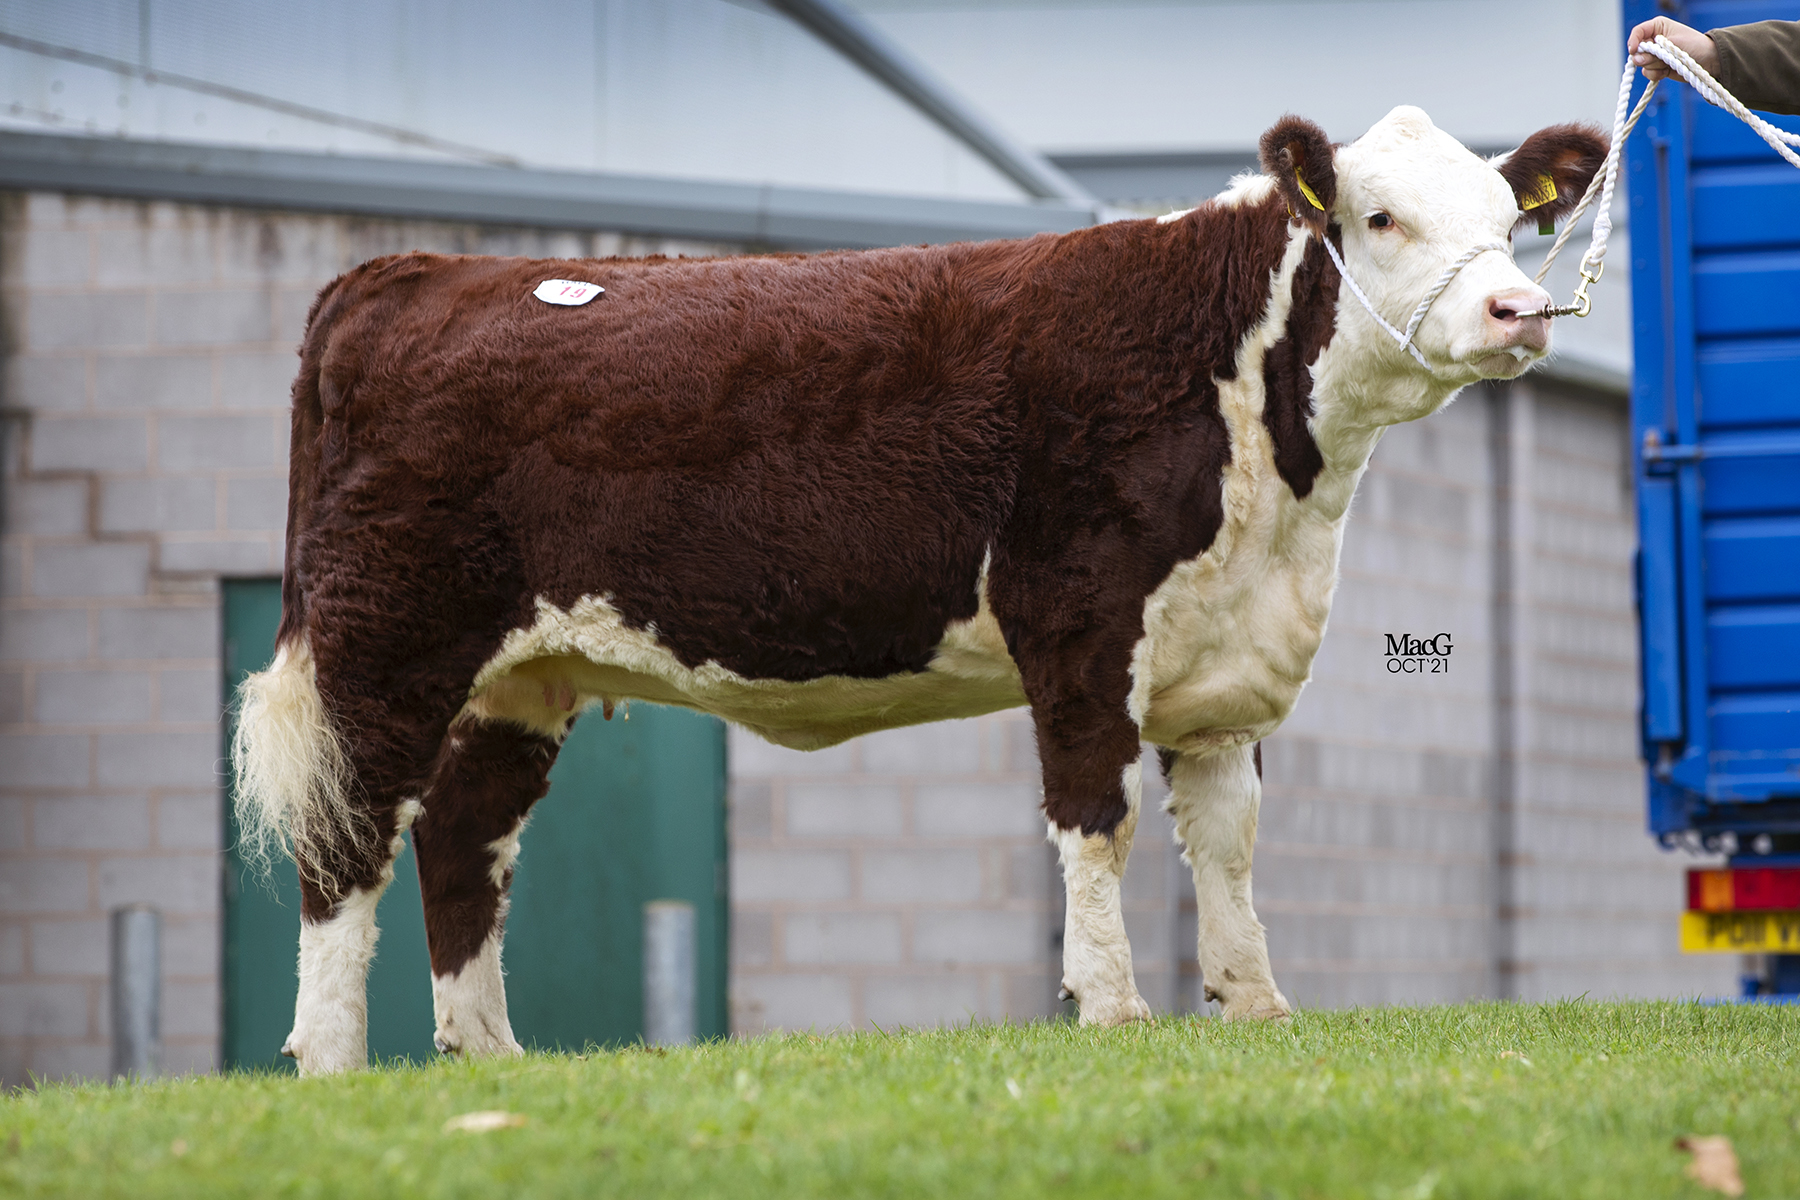 Moorside 1 New Dawn made 5500gns to Pertshire breeder, Iain Wilkinson